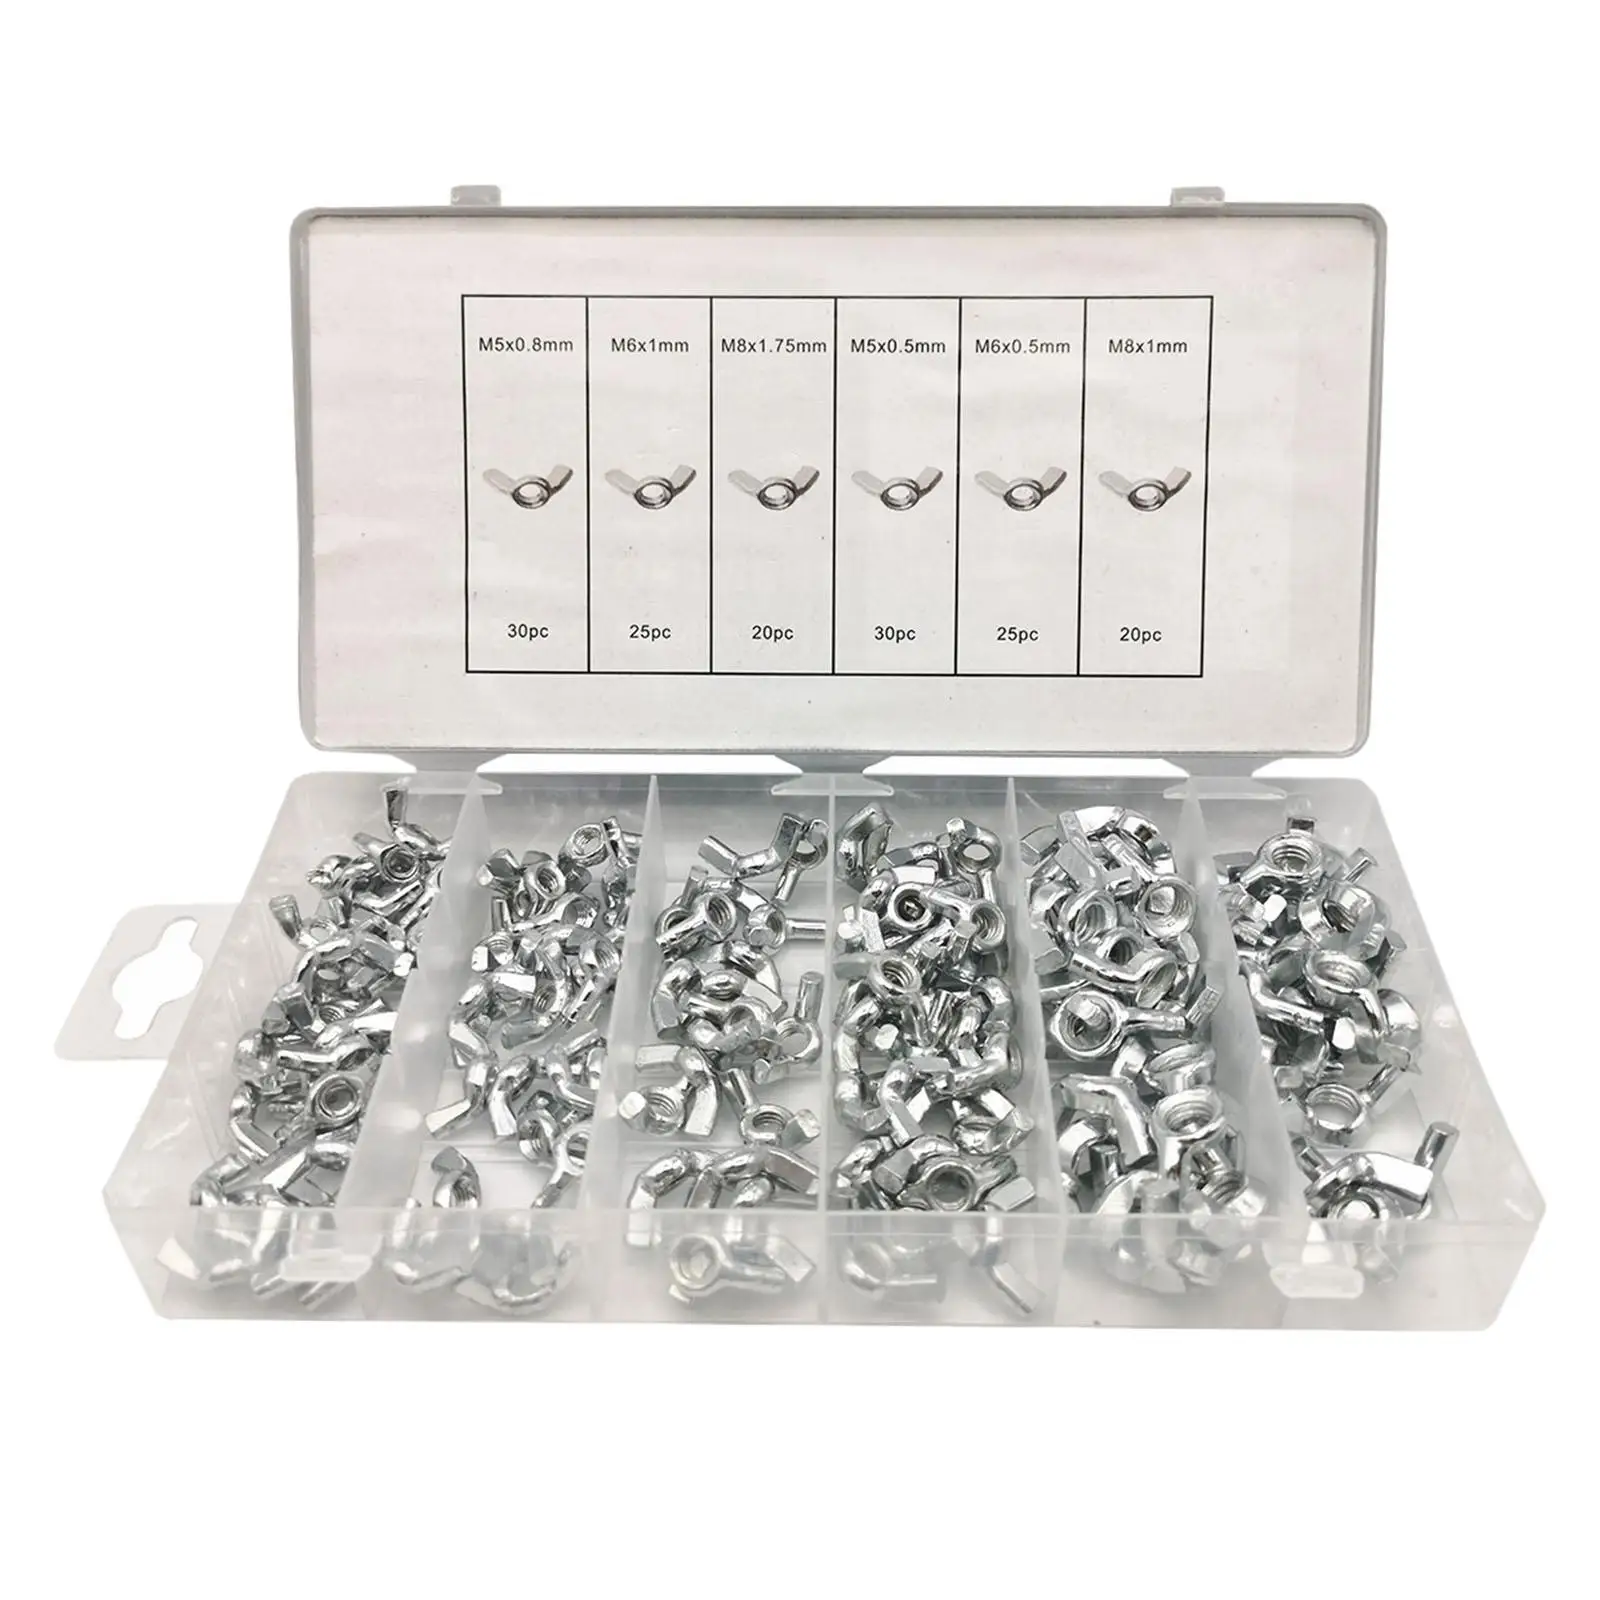 150Pcs Butterfly Wing Nuts Assortment Kit M5 M6 M8 Ear Butterfly Nut with Box Fasteners